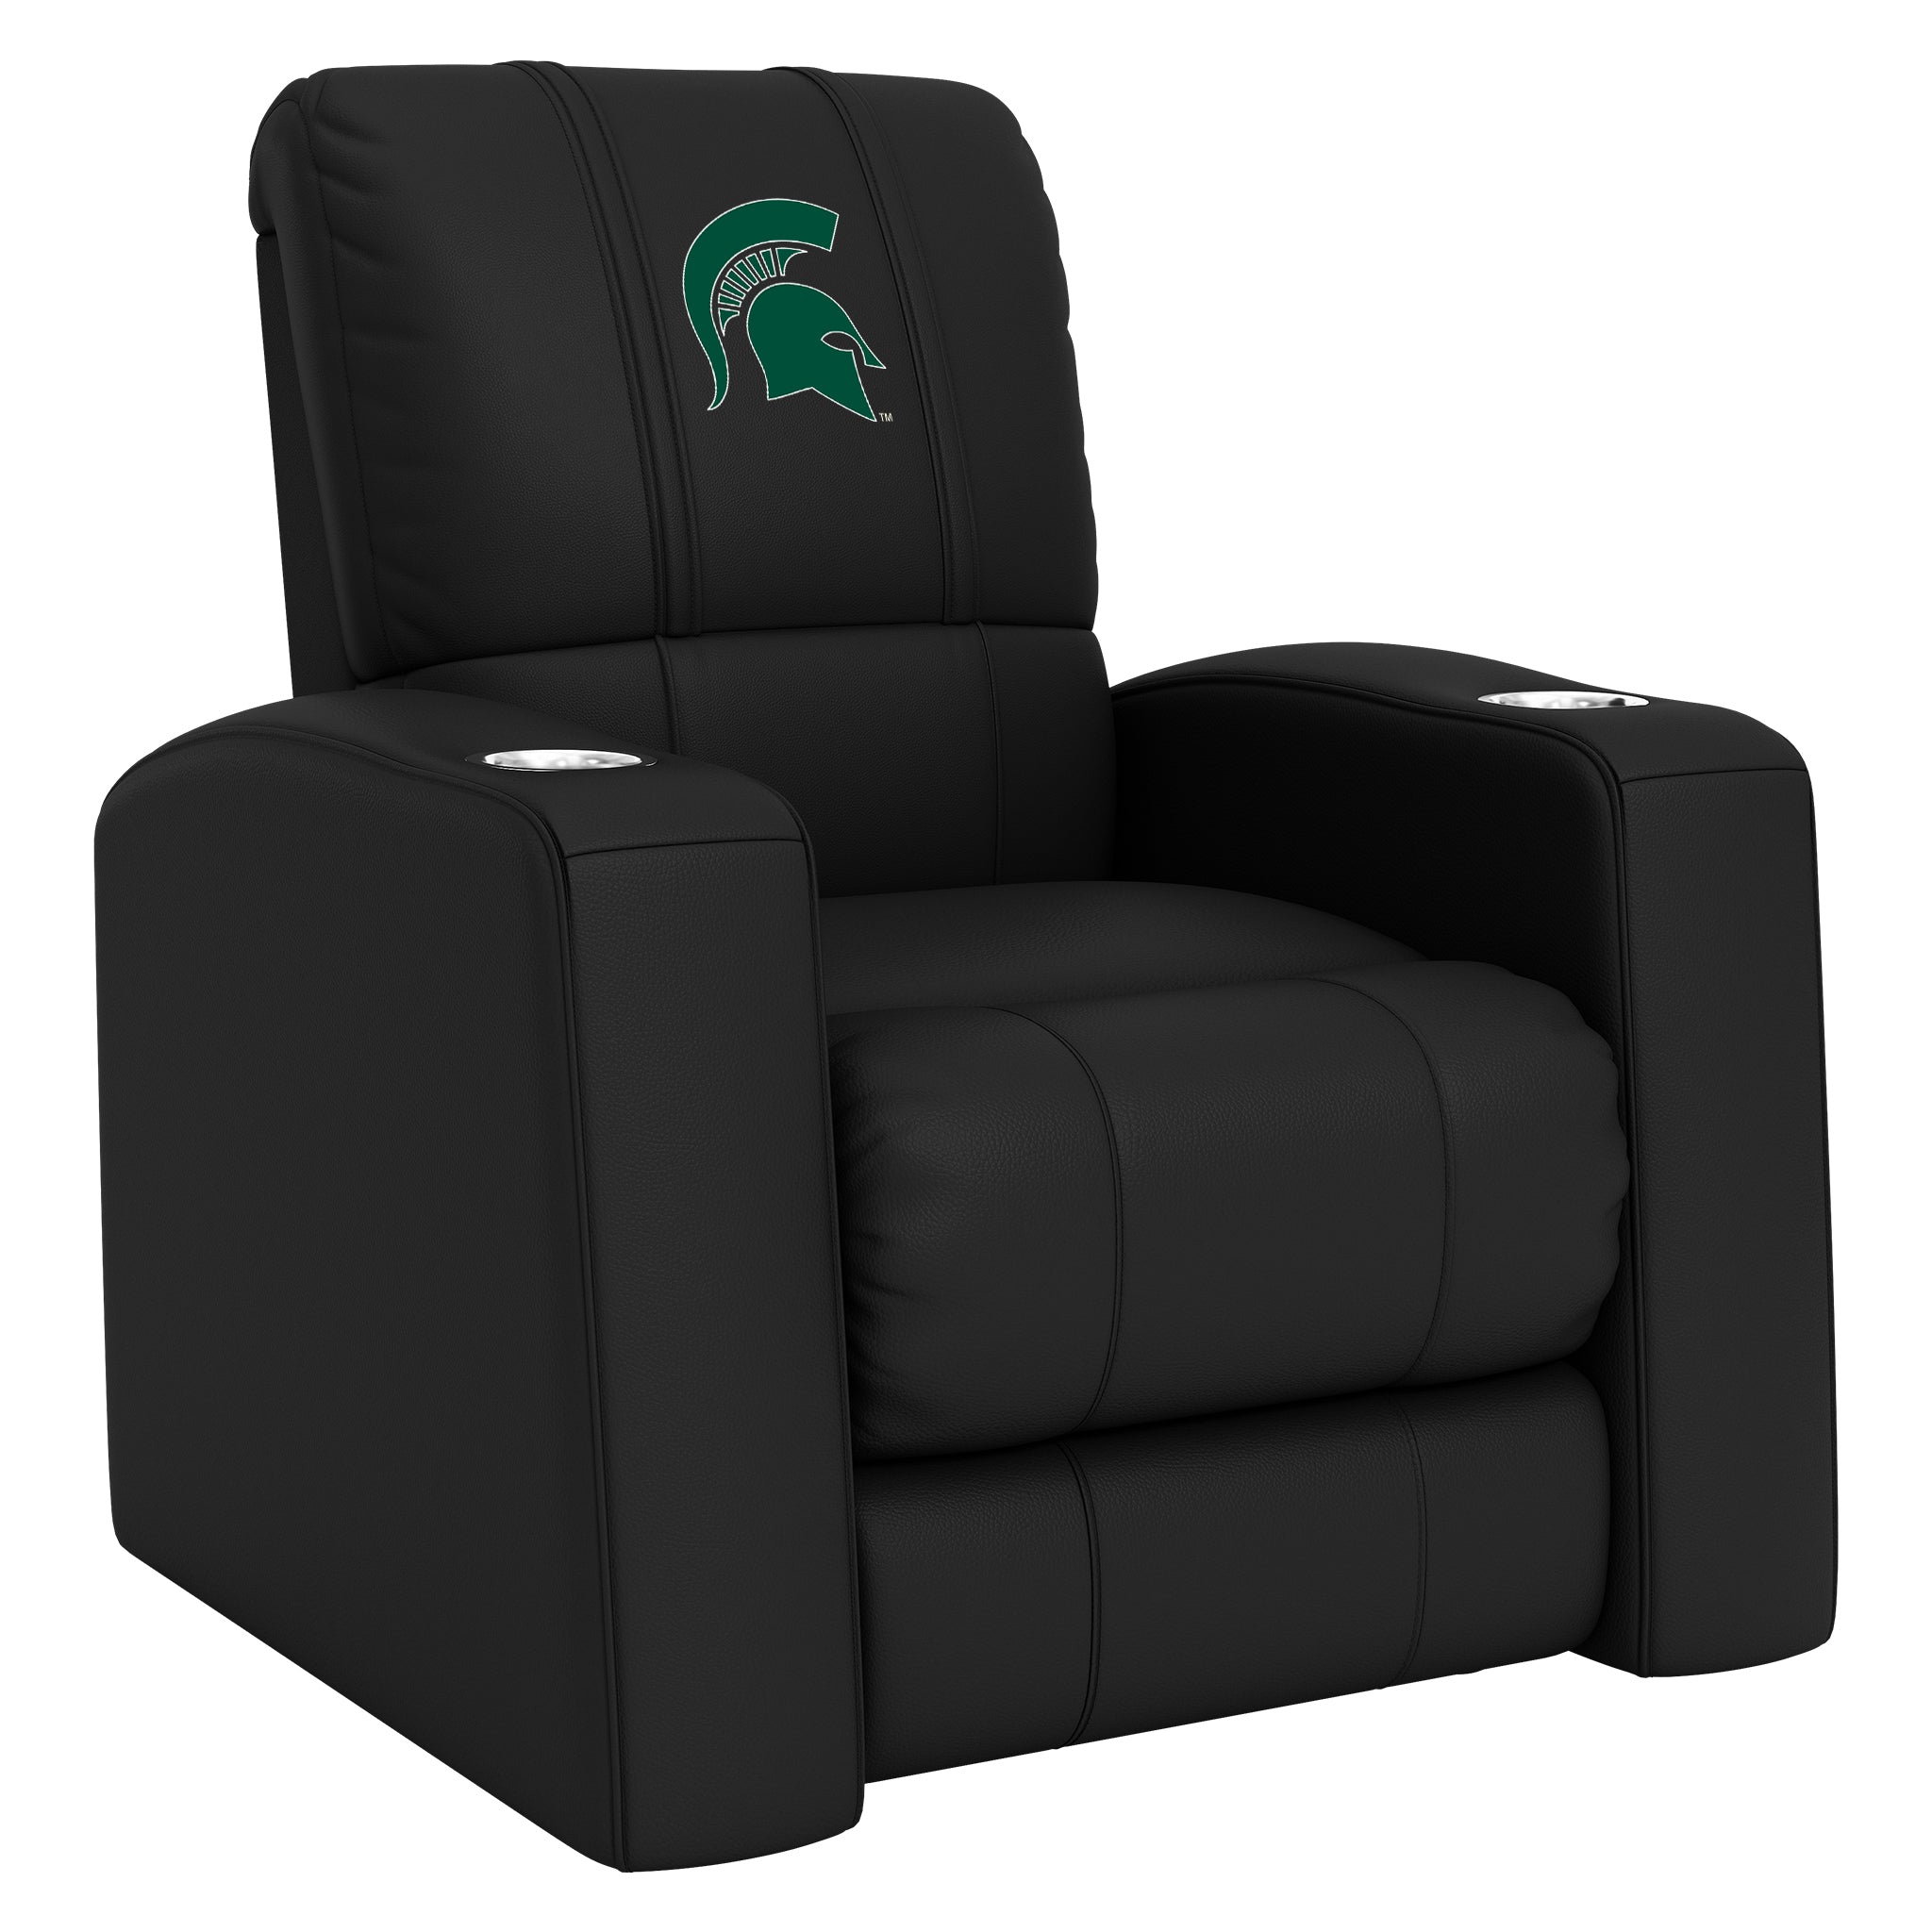 Michigan State Spartans Home Theater Recliner with Michigan State Spartans Logo